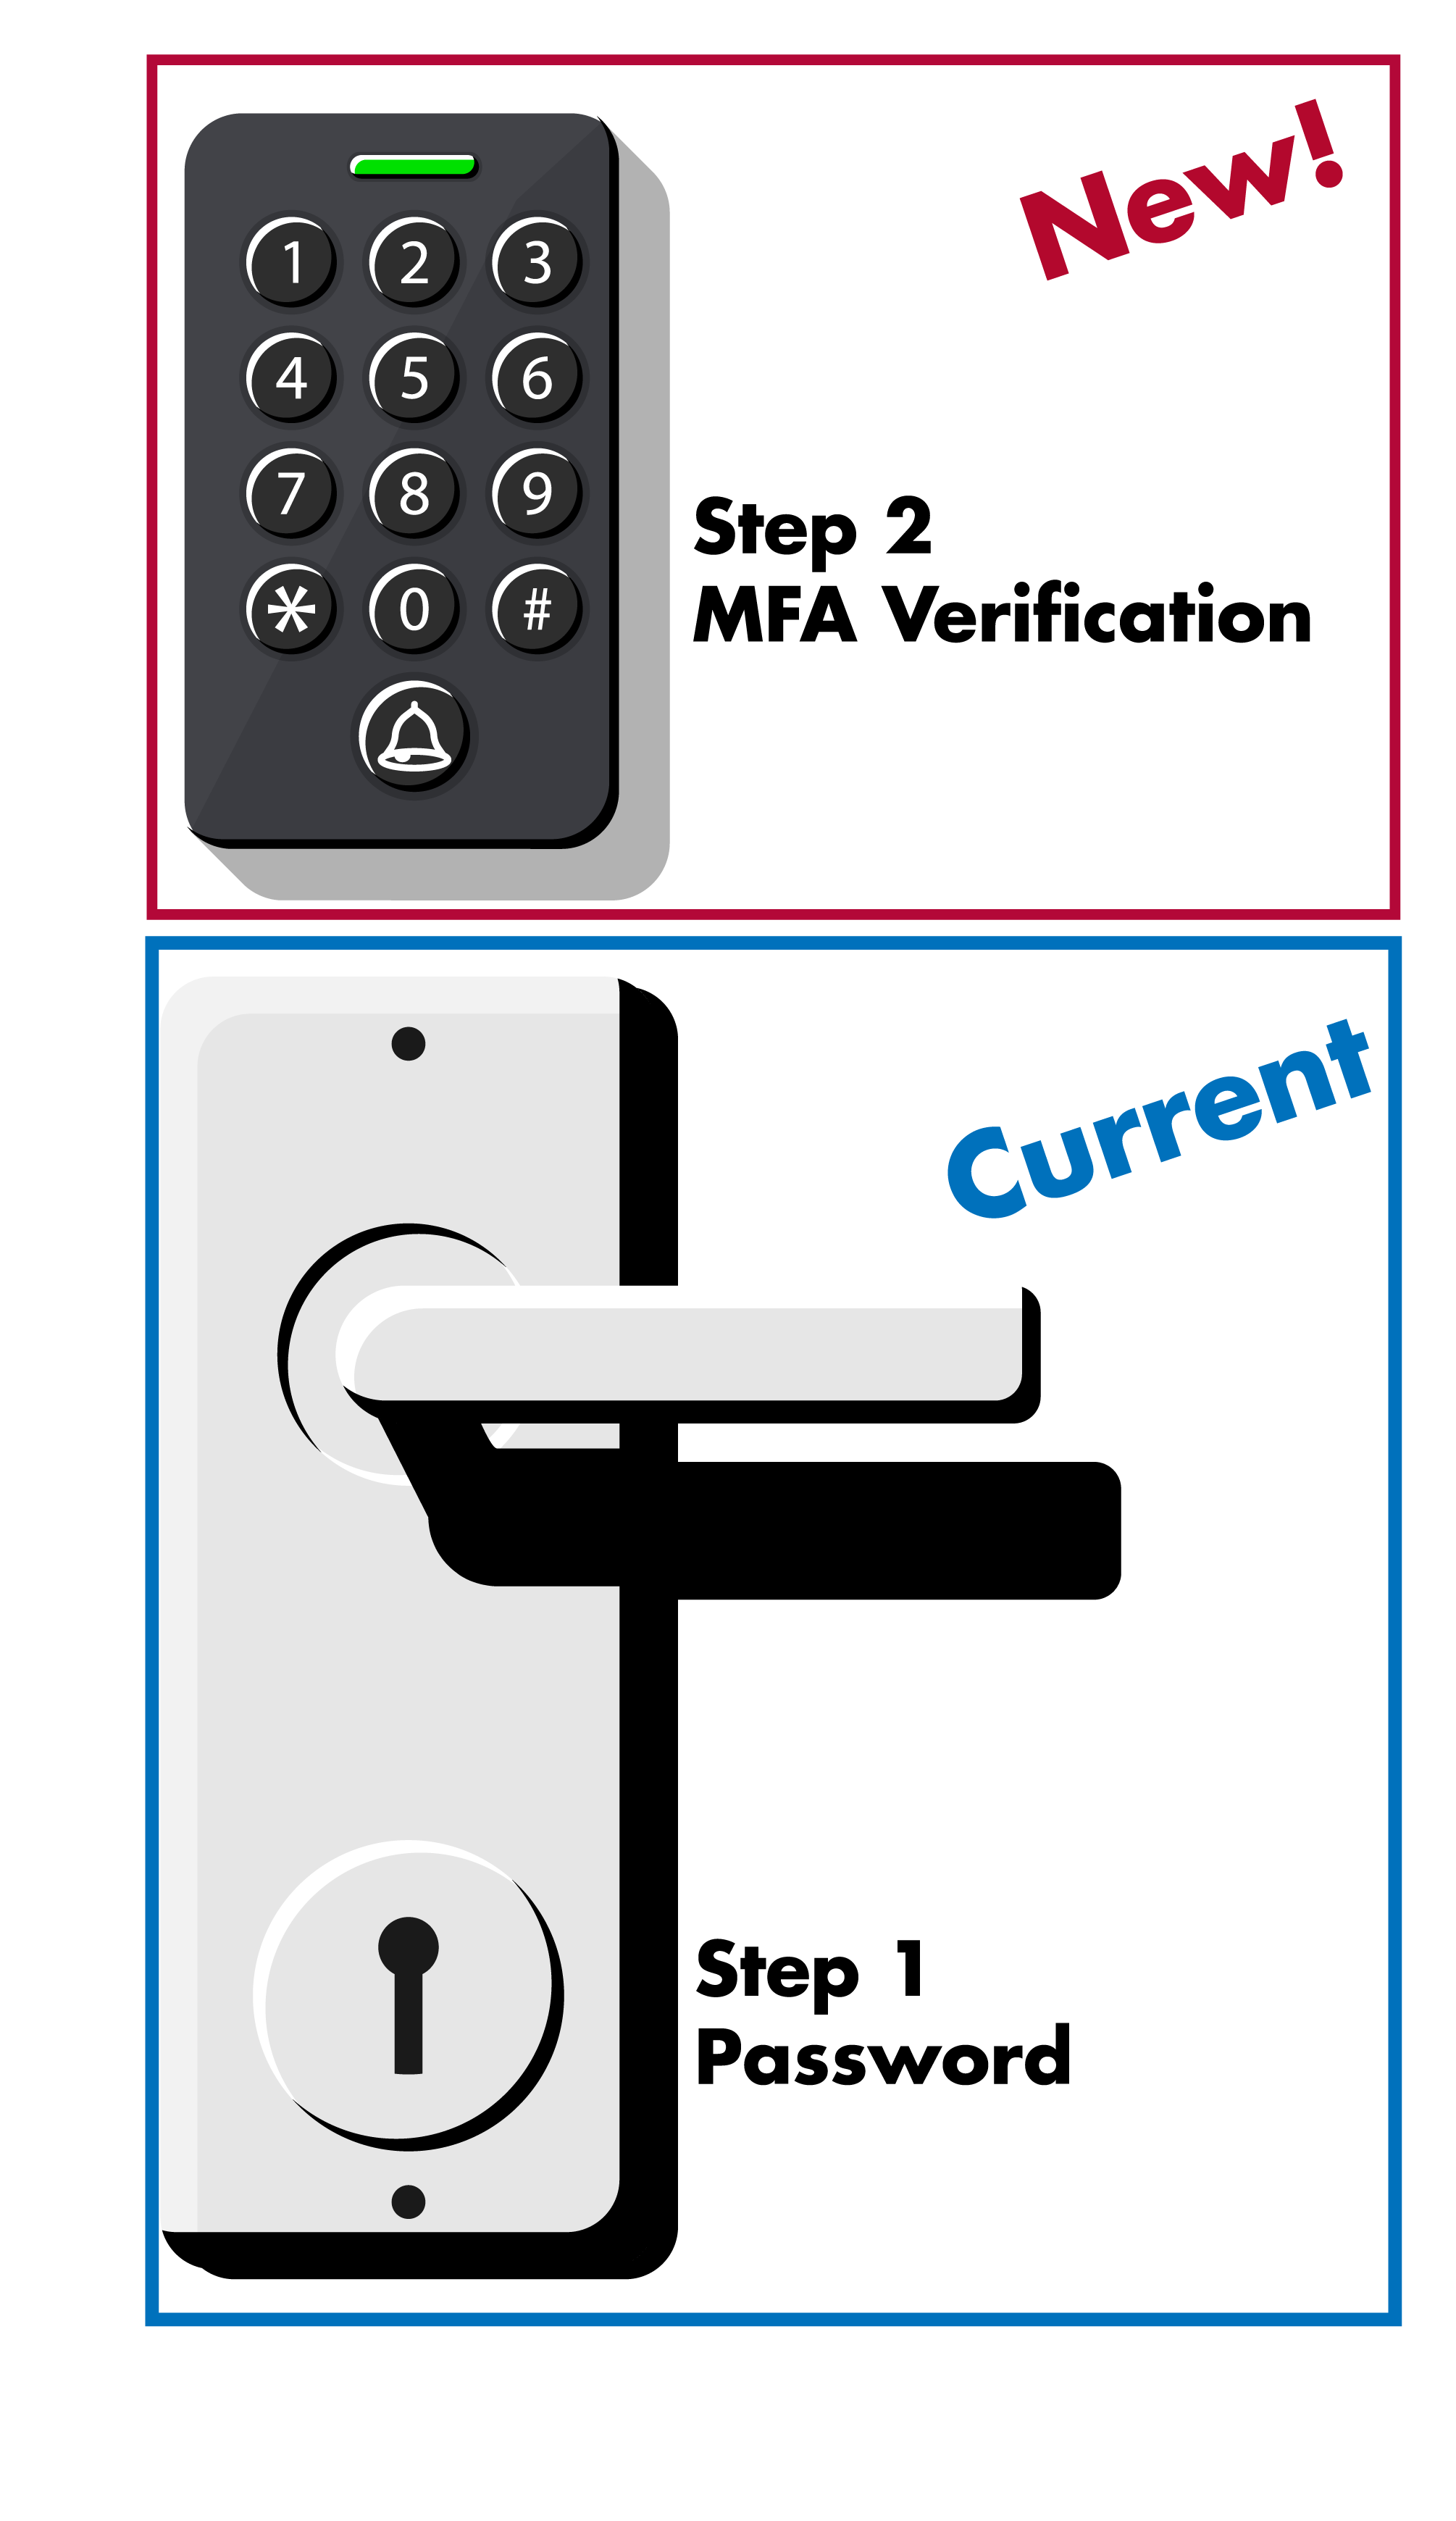 image of a door handle with a key lock below the handle and a numerical keypad lock above the handle.   Beside the key lock, the text reads "Step 1 Password"  Beside the numerical pad lock, the text reads "New! Step 2 MFA Verification"